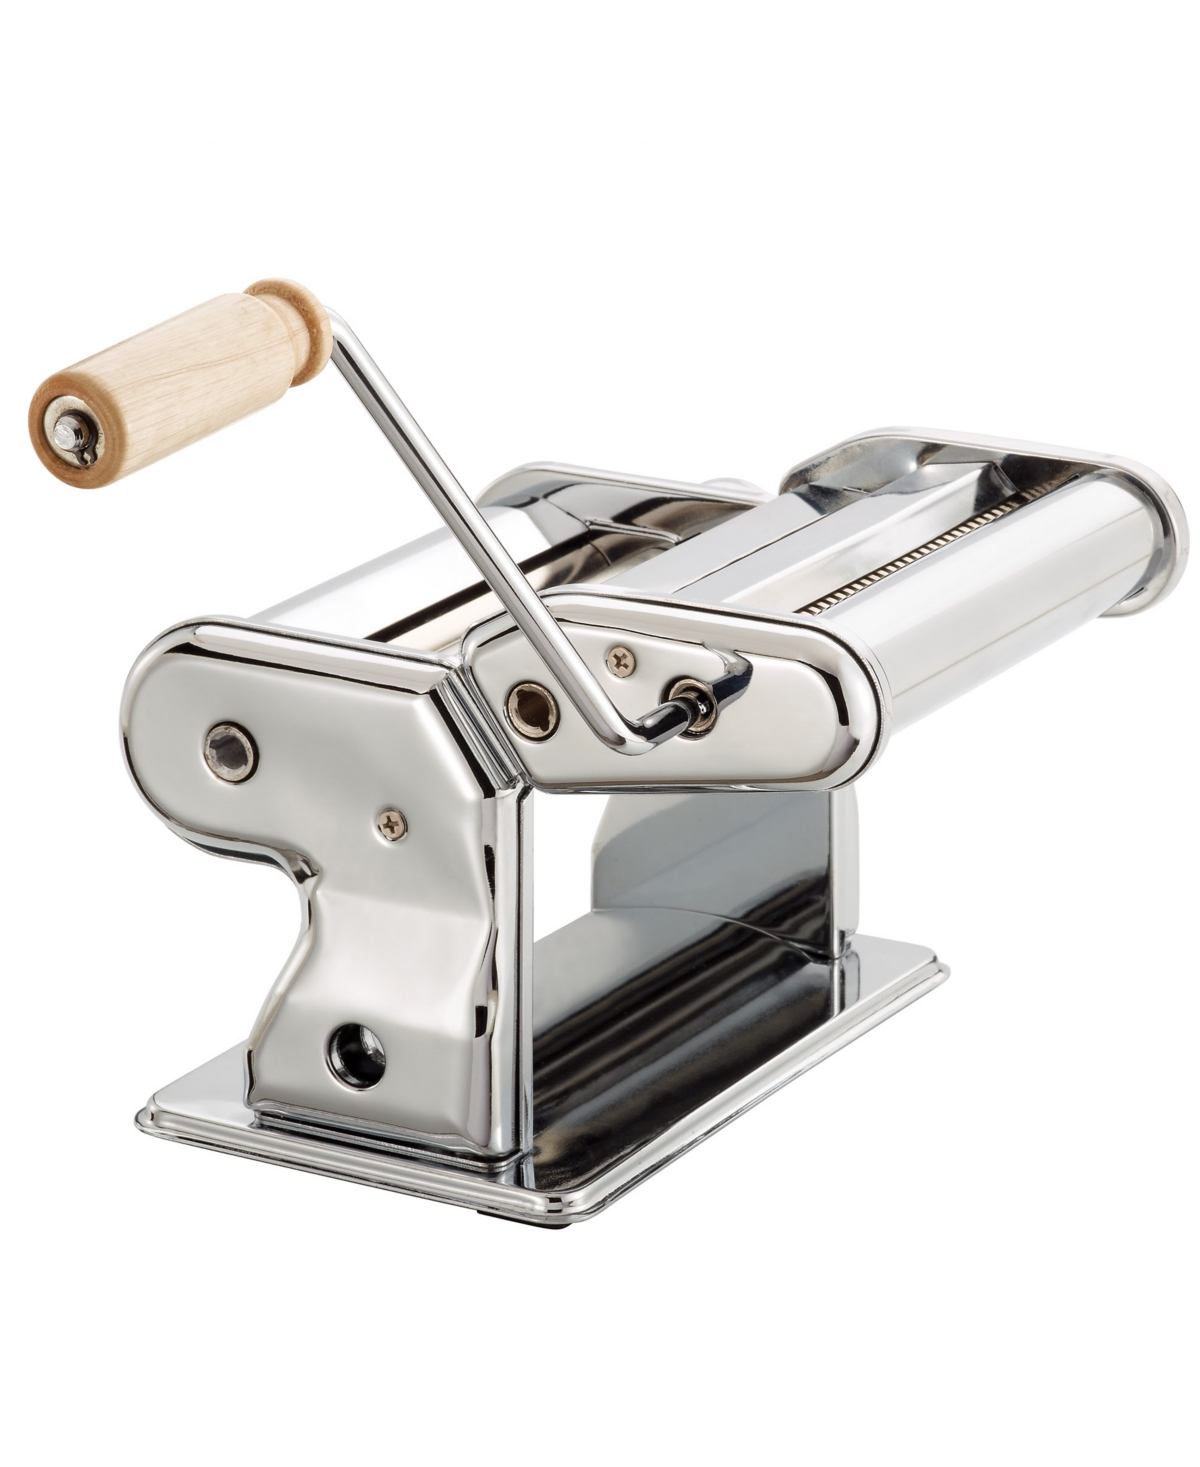 Fante’s Pasta Machine, Chromed Steel With Wood Handle, The Italian Market Original Since 1906 In Silver